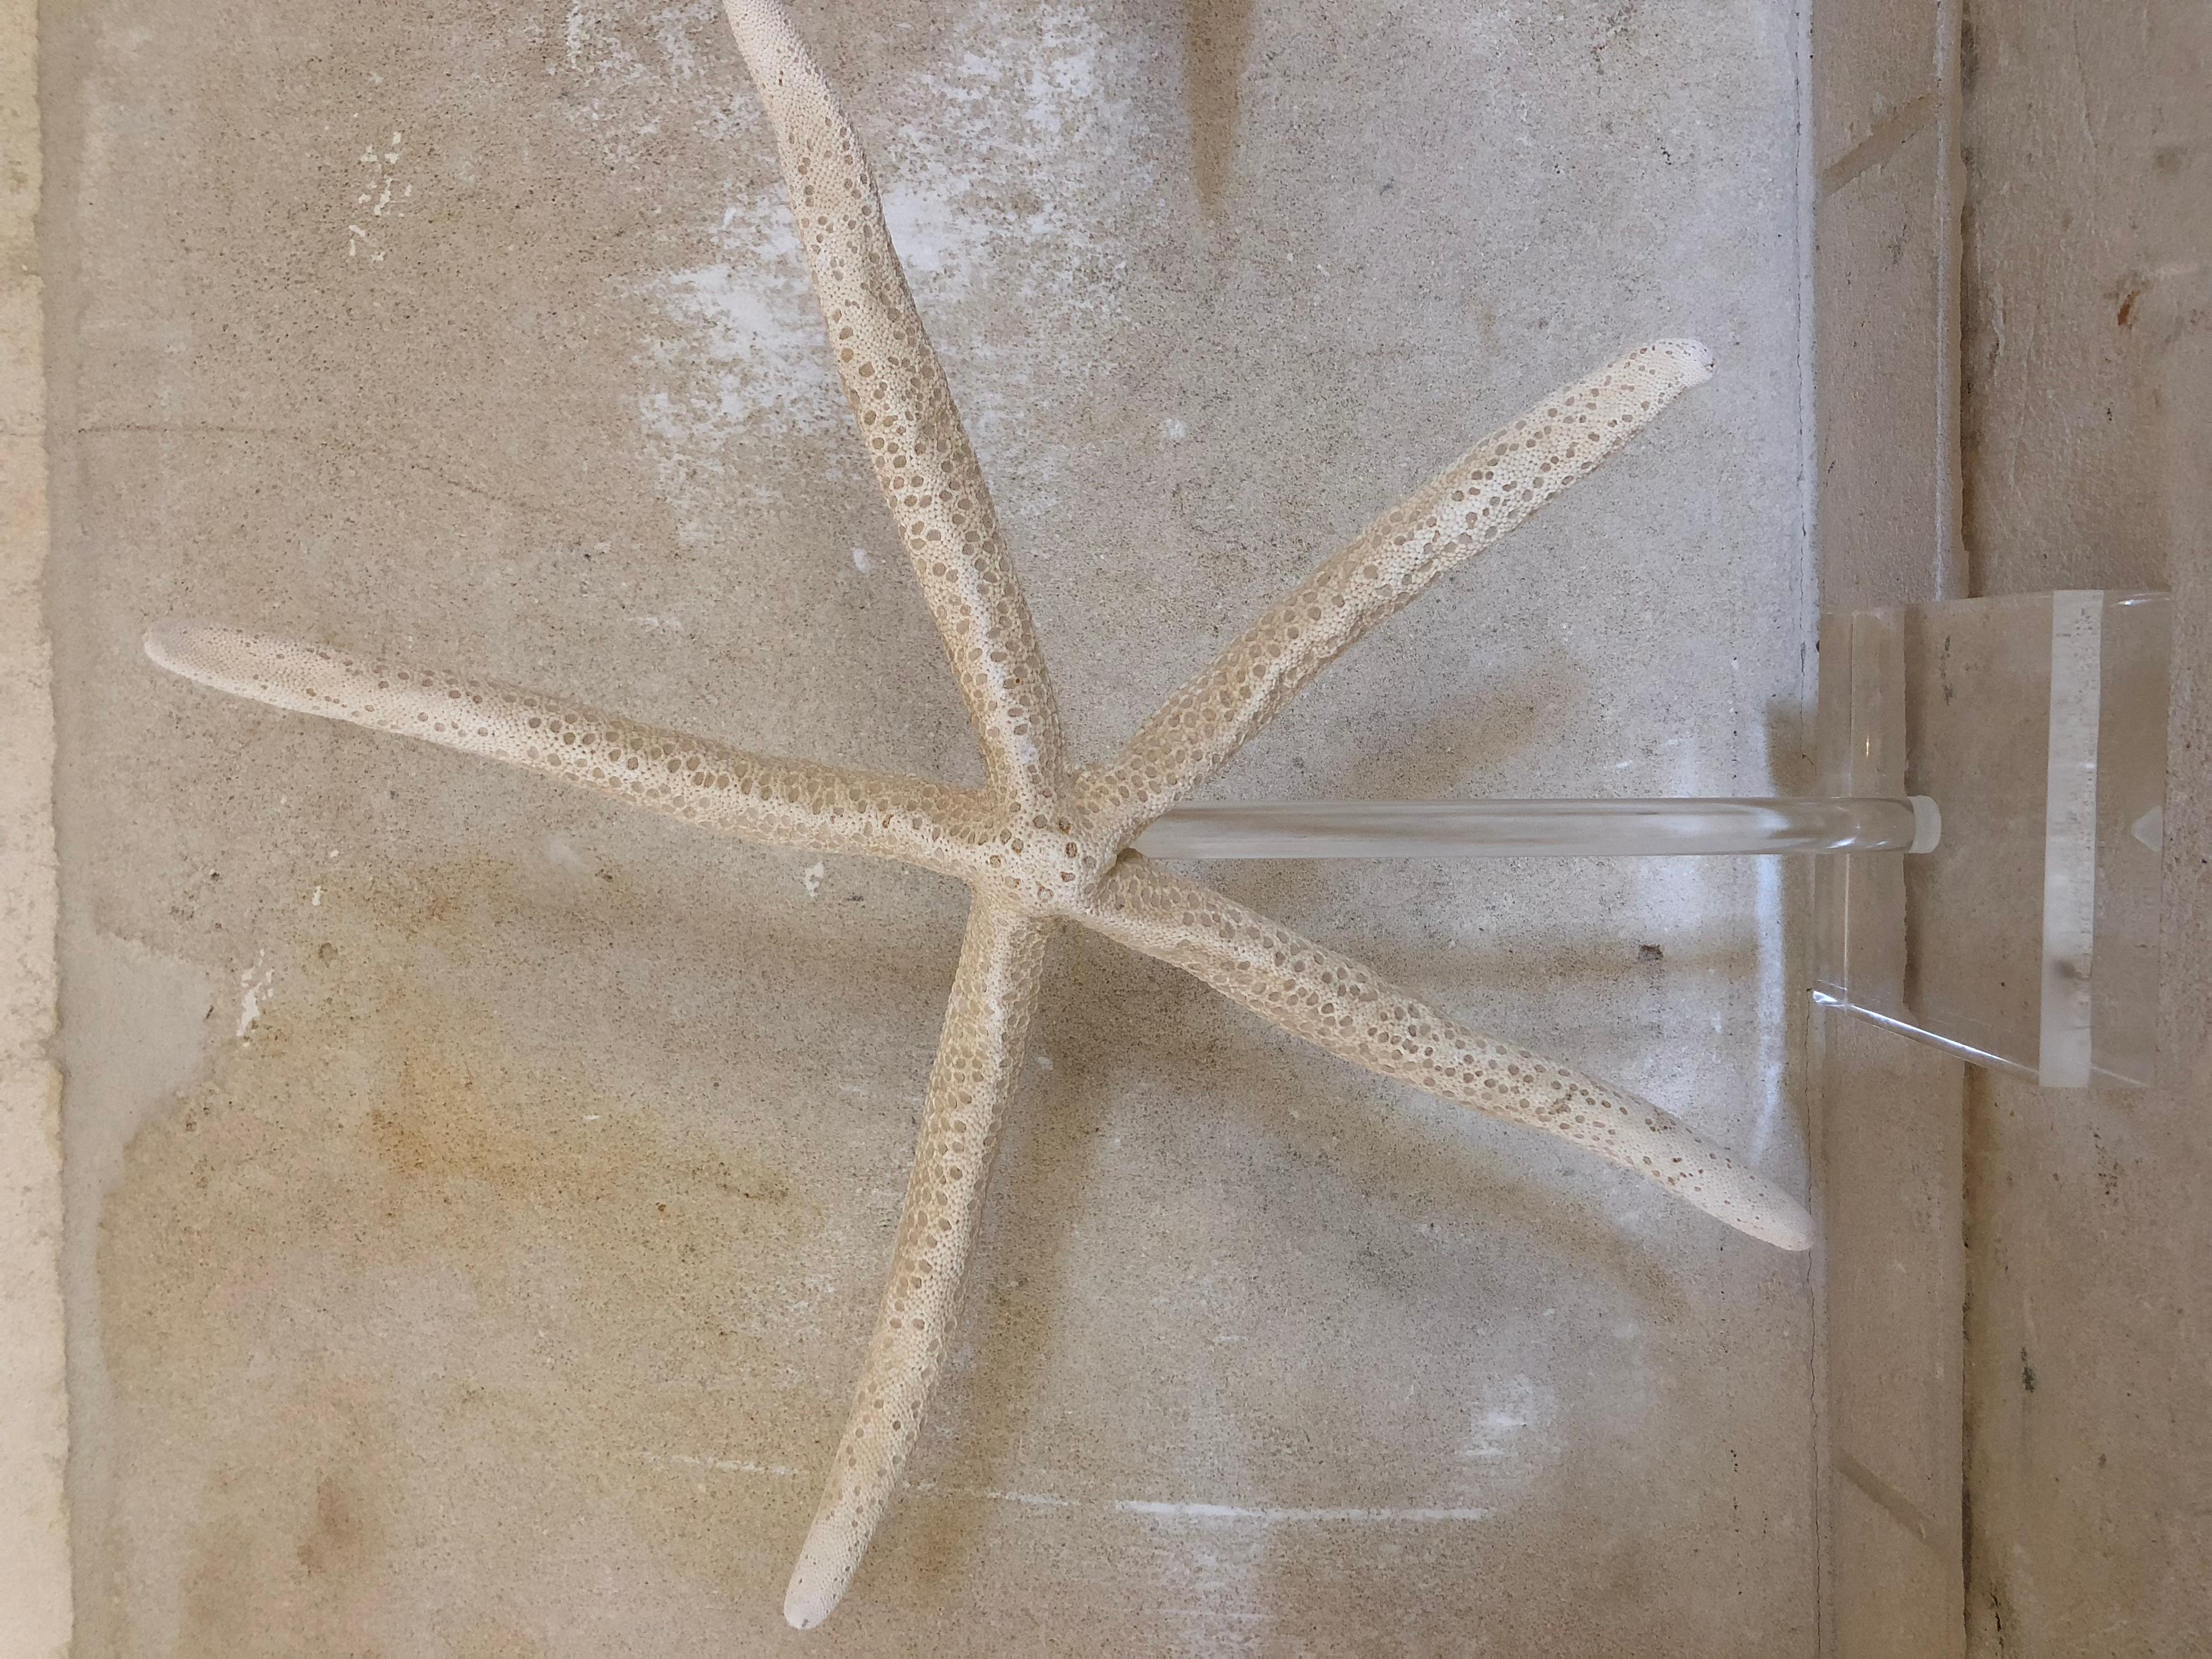 These starfish were selected from a British Collection and date to middle of the 19tt century. There are 19 available. They have been mounted in 7 & 9 inch acrylic stands. Dimensions range from 15 inches in diameter to 12 inches. Improbable to find